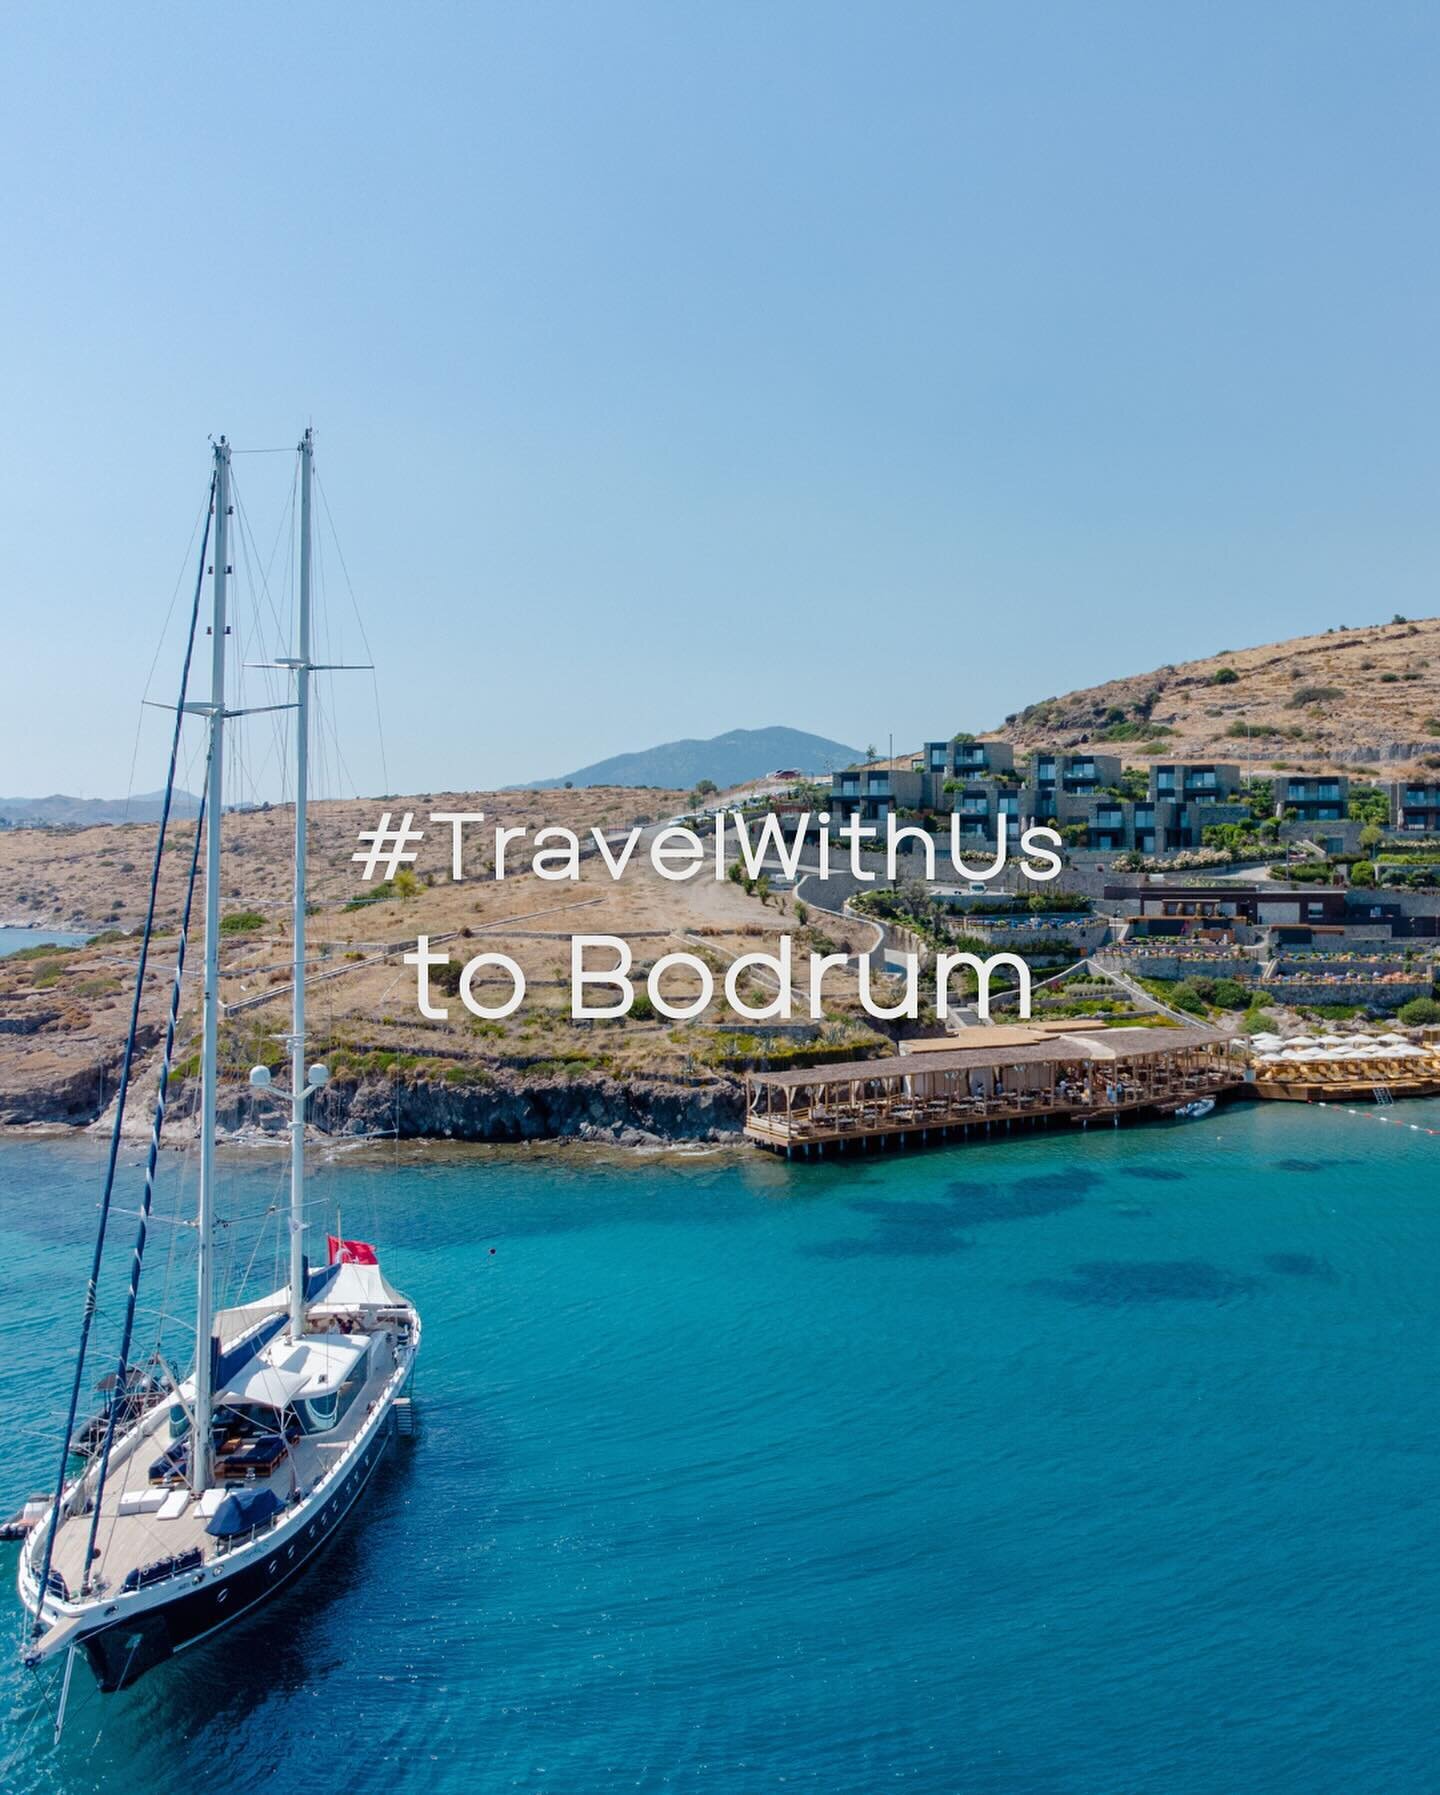 In 2021 we proudly expanded our global footprint to Turkey, the 9th country on our journey across 17 destinations worldwide! #TravelWithUs to Bodrum and indulge in luxury at METT Hotel &amp; Beach Resort or Yalıkavak Marina Hotel Resorts by Social Li